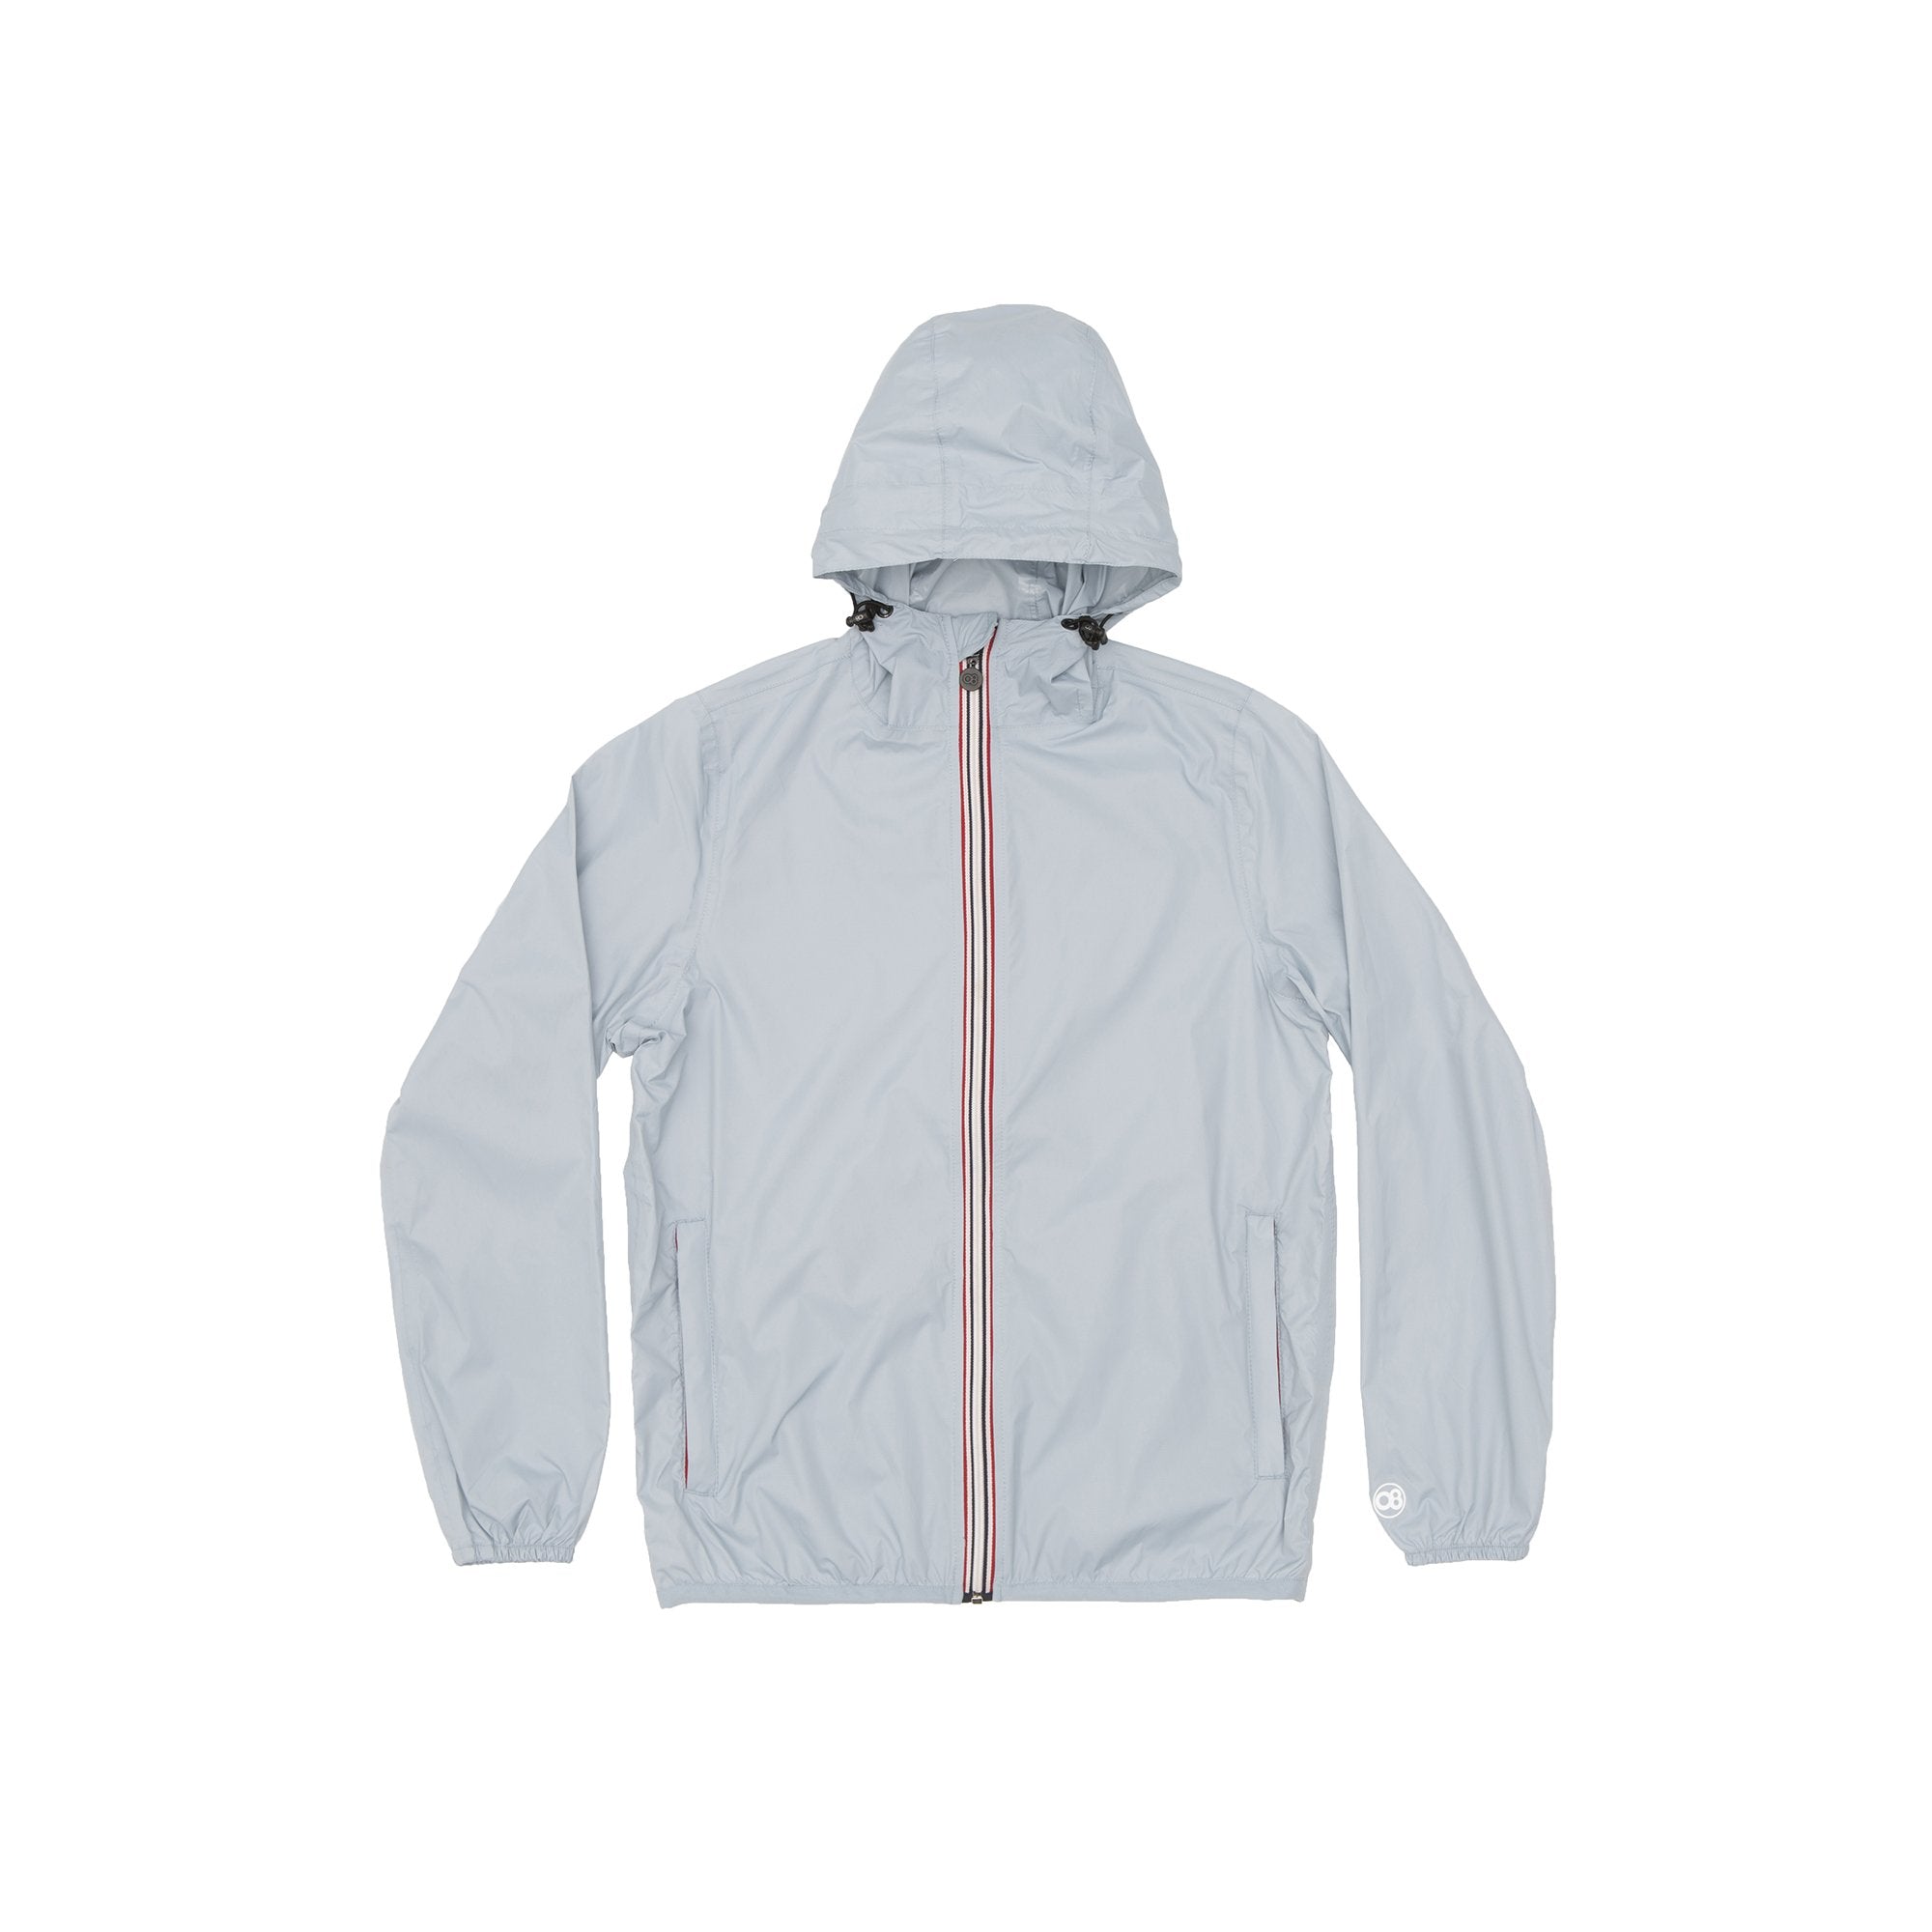 Picture of a Men's Full Zip Blue Waterproof Rain Jacket product laying flat on white backdrop